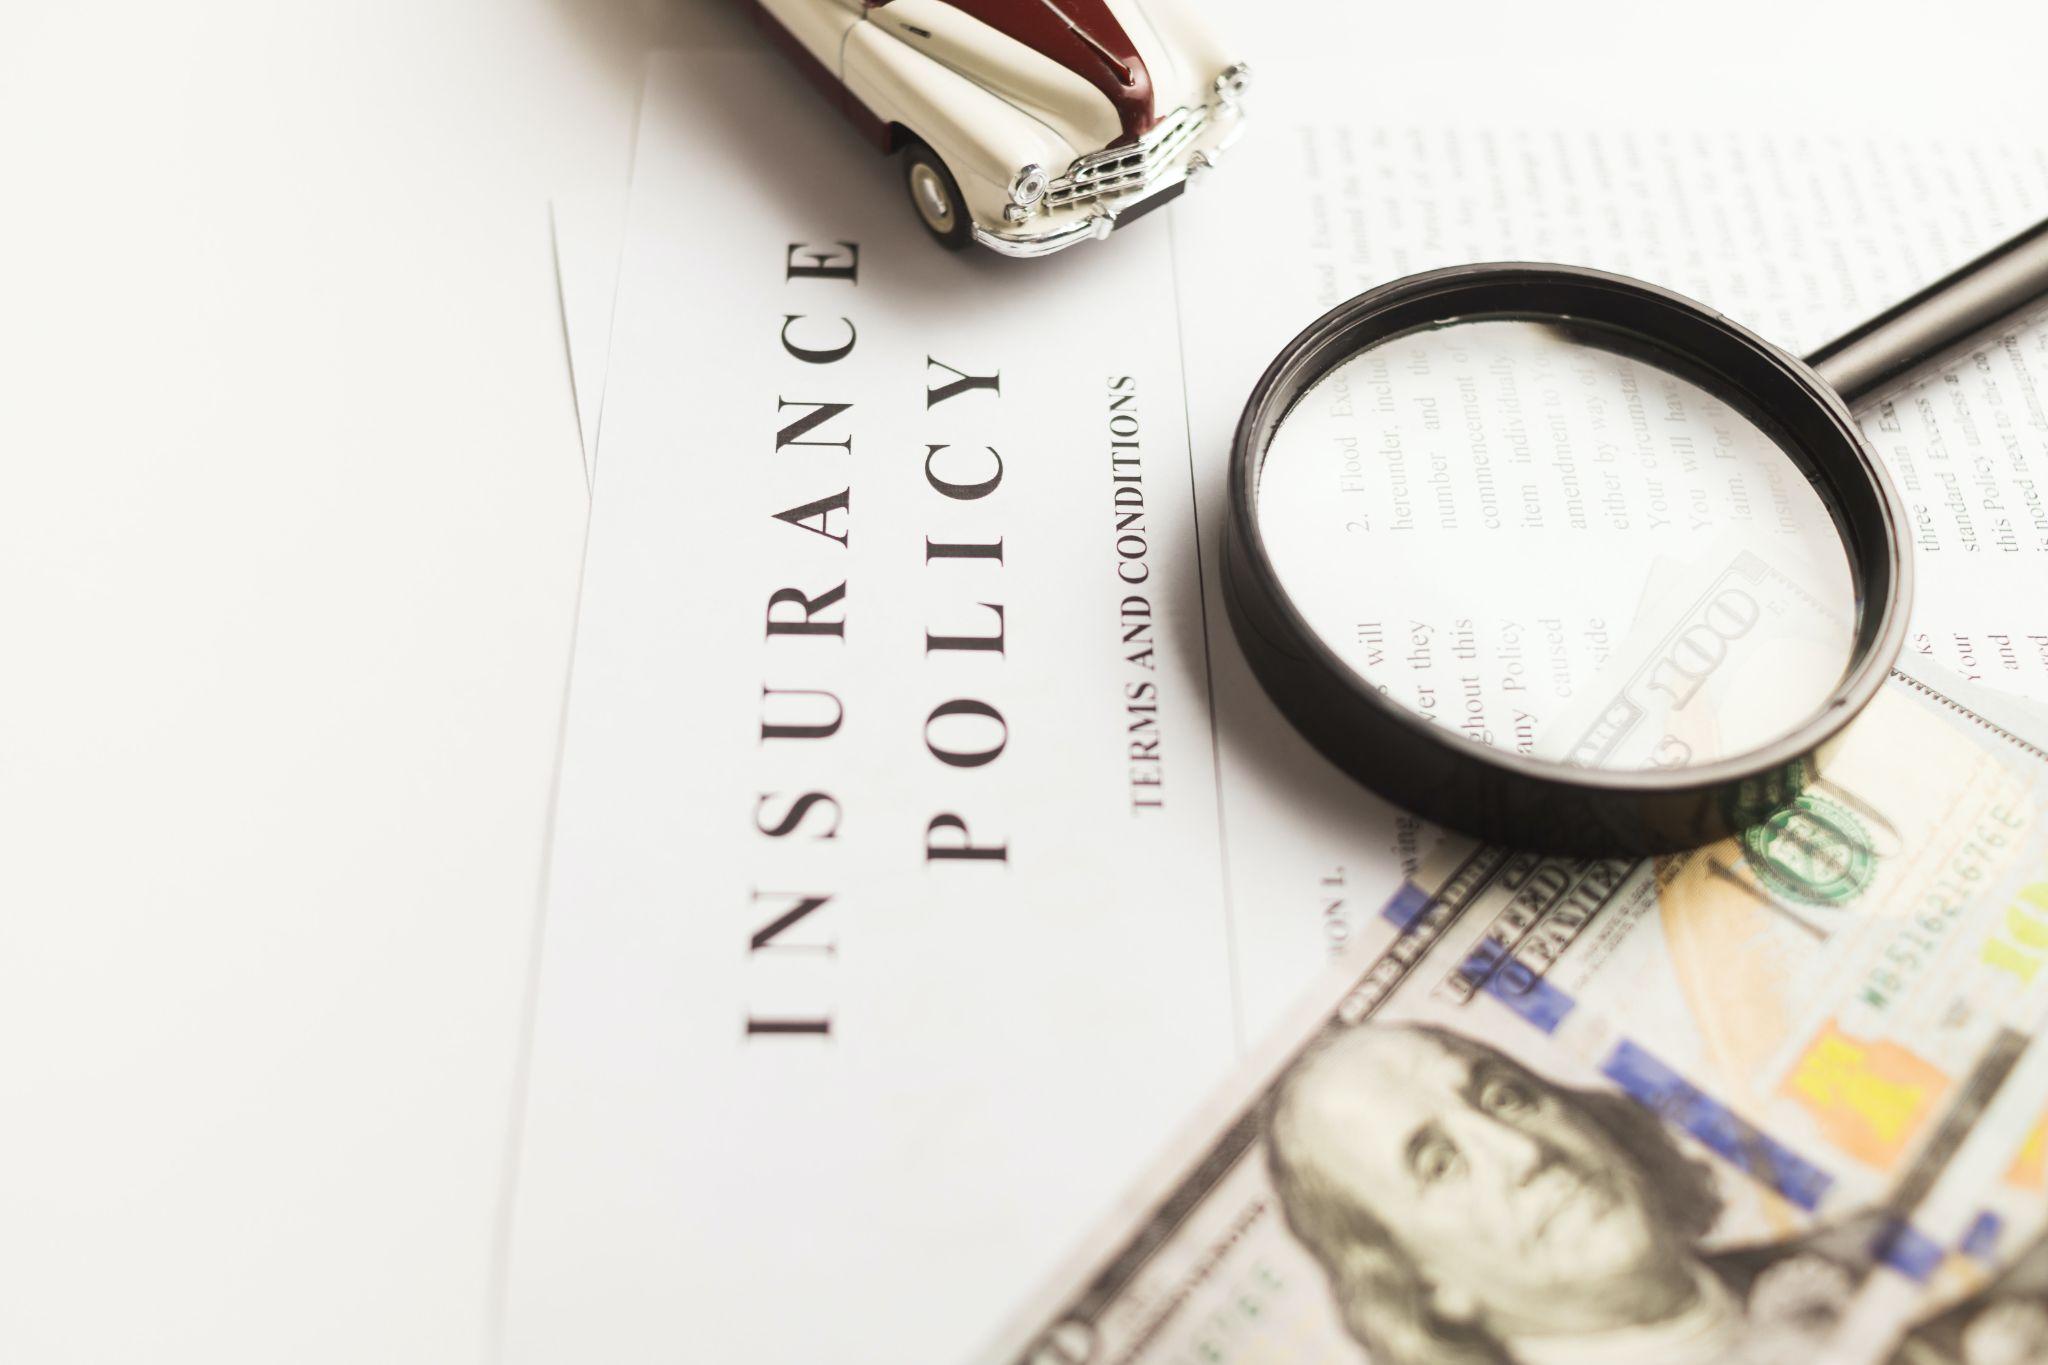 How long should a business keep expired insurance policies